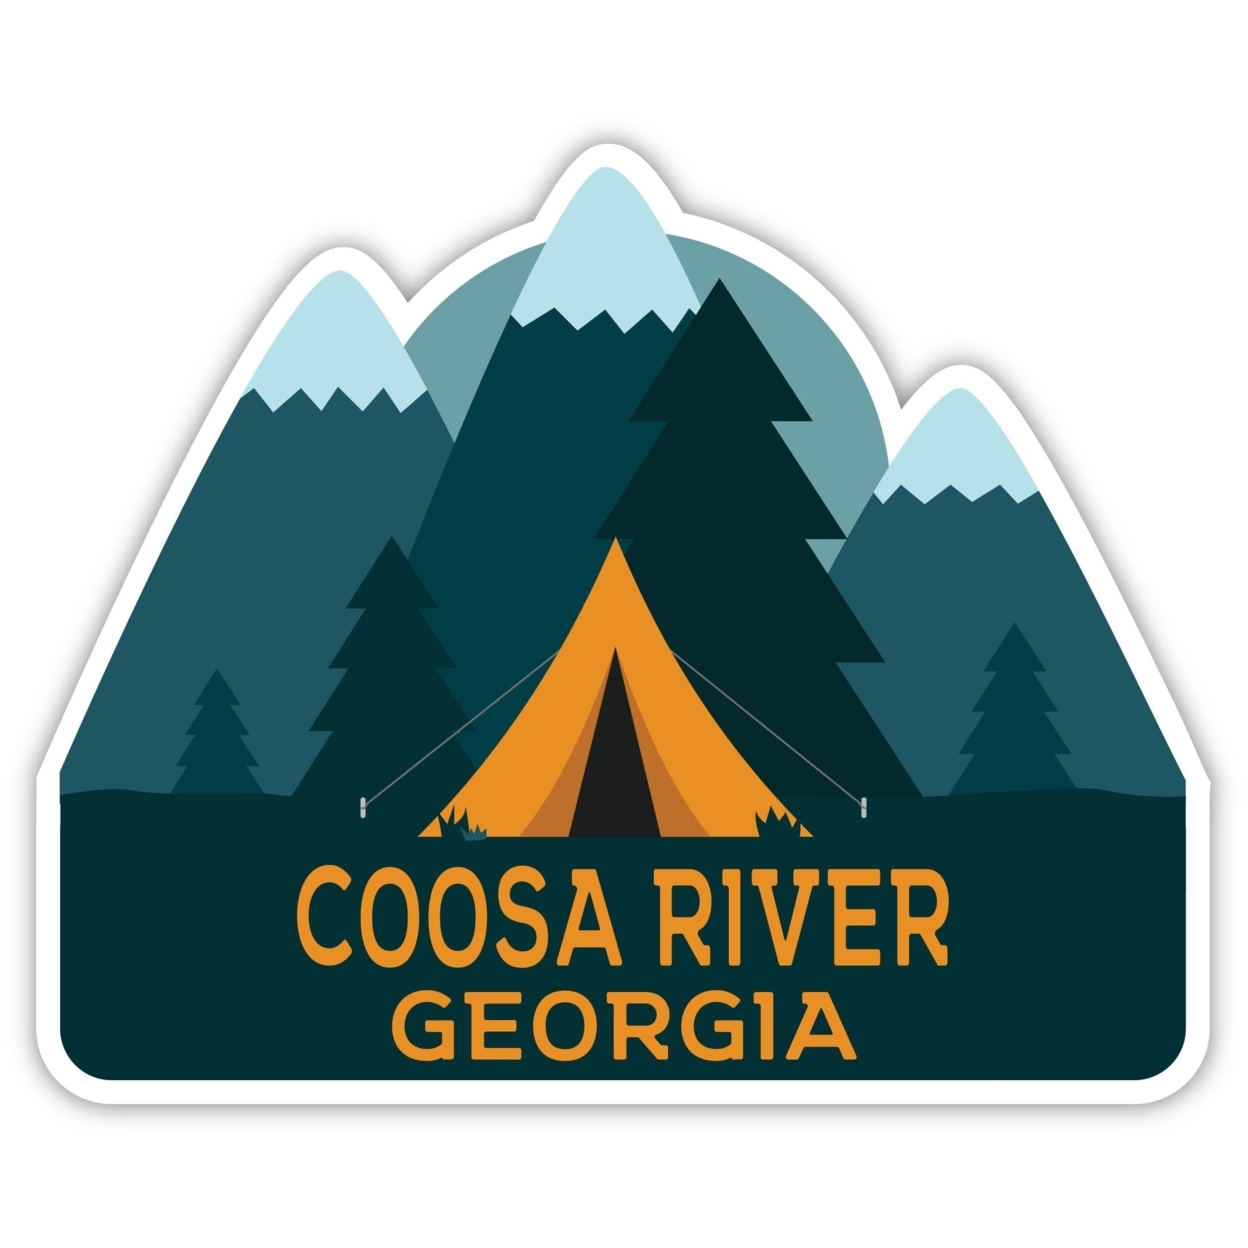 Coosa River Georgia Souvenir Decorative Stickers (Choose Theme And Size) - 4-Pack, 2-Inch, Tent